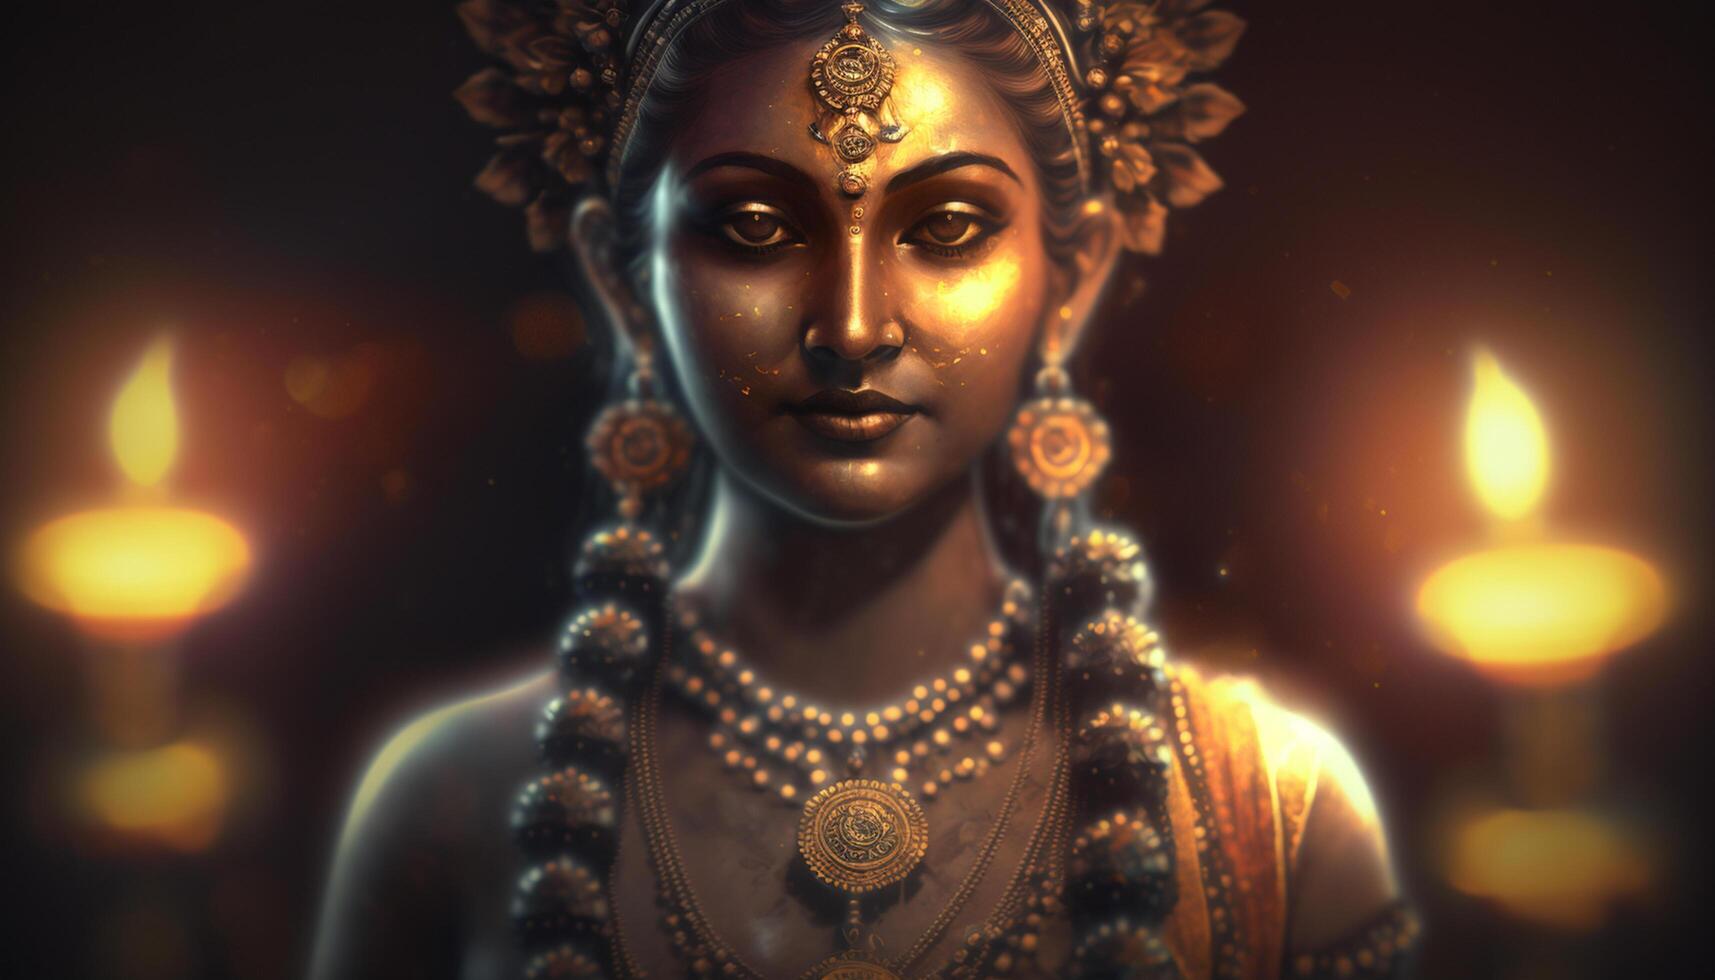 Lakshmi The Radiant Indian Goddess of Wealth and Fortune in Artistic Glory photo